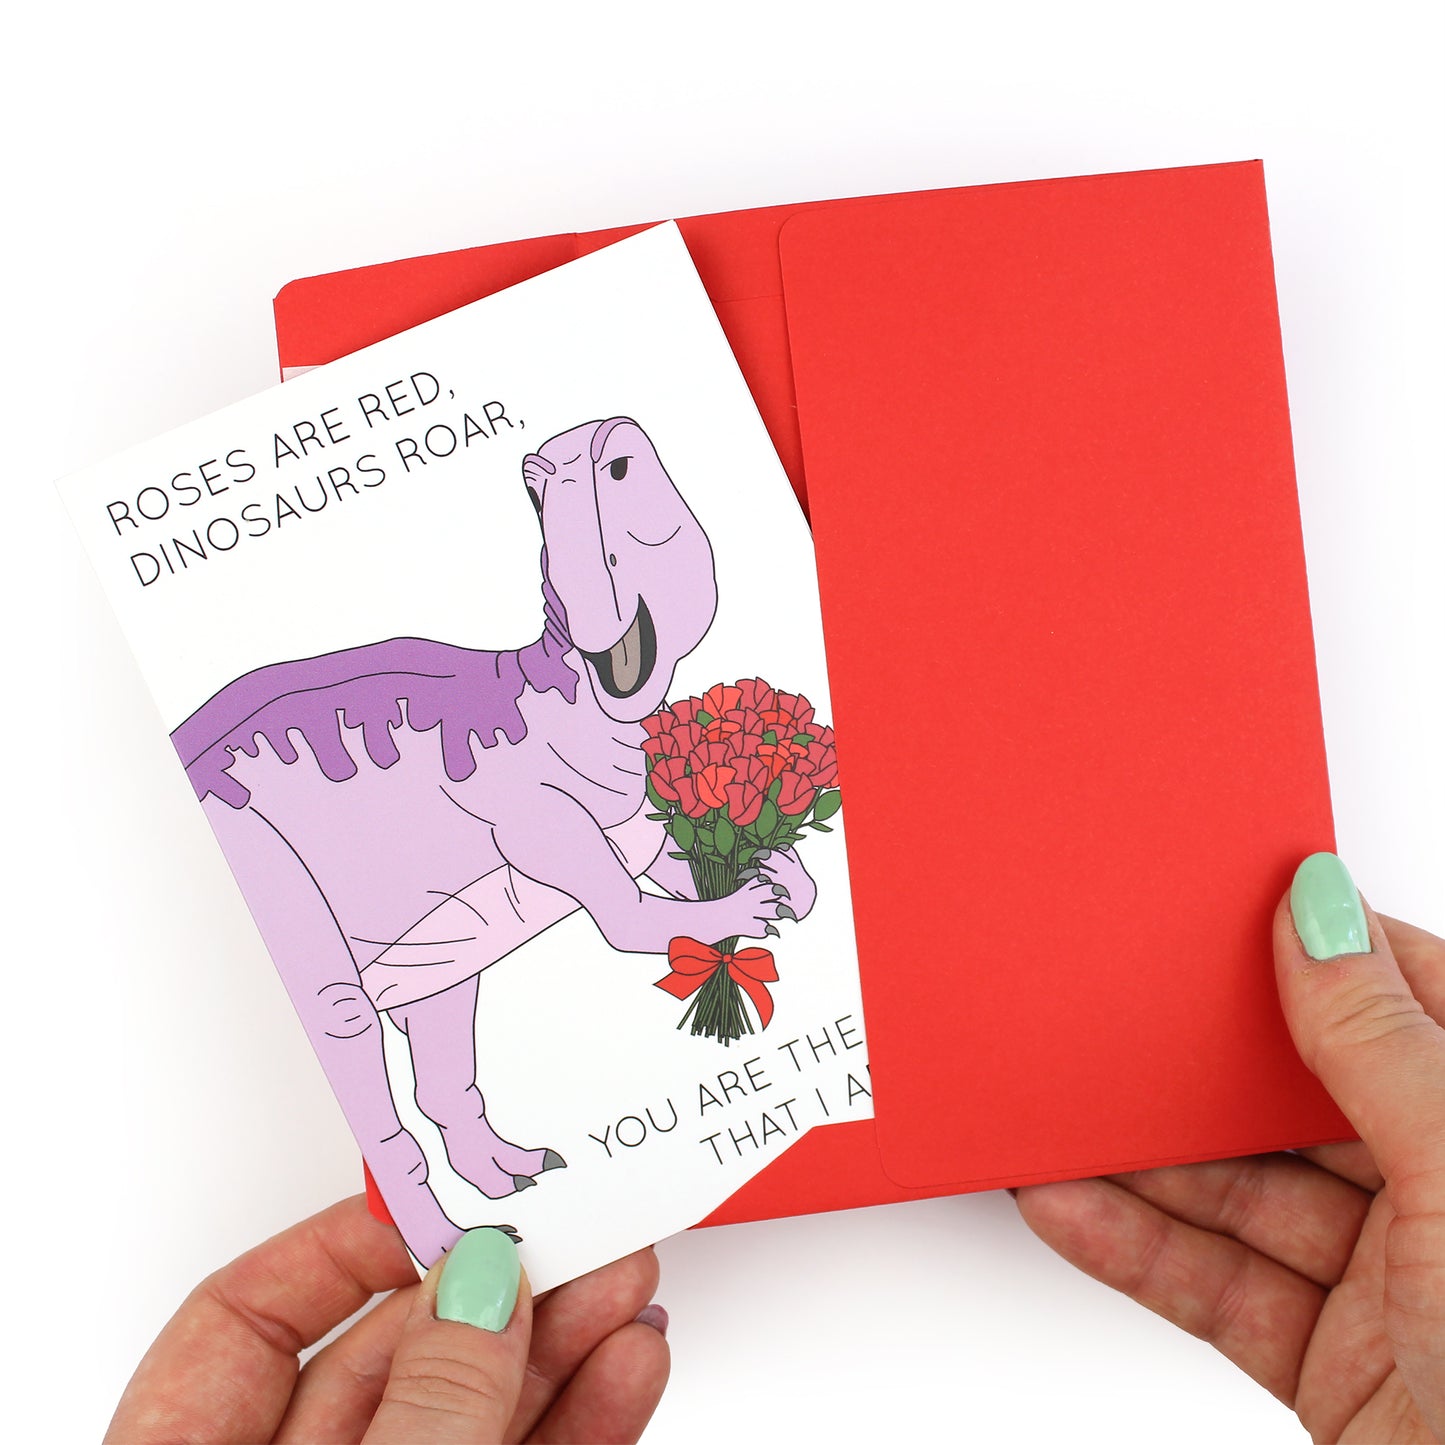 hands holding an envelope while removing the roses are red dinosaur card from the envelope